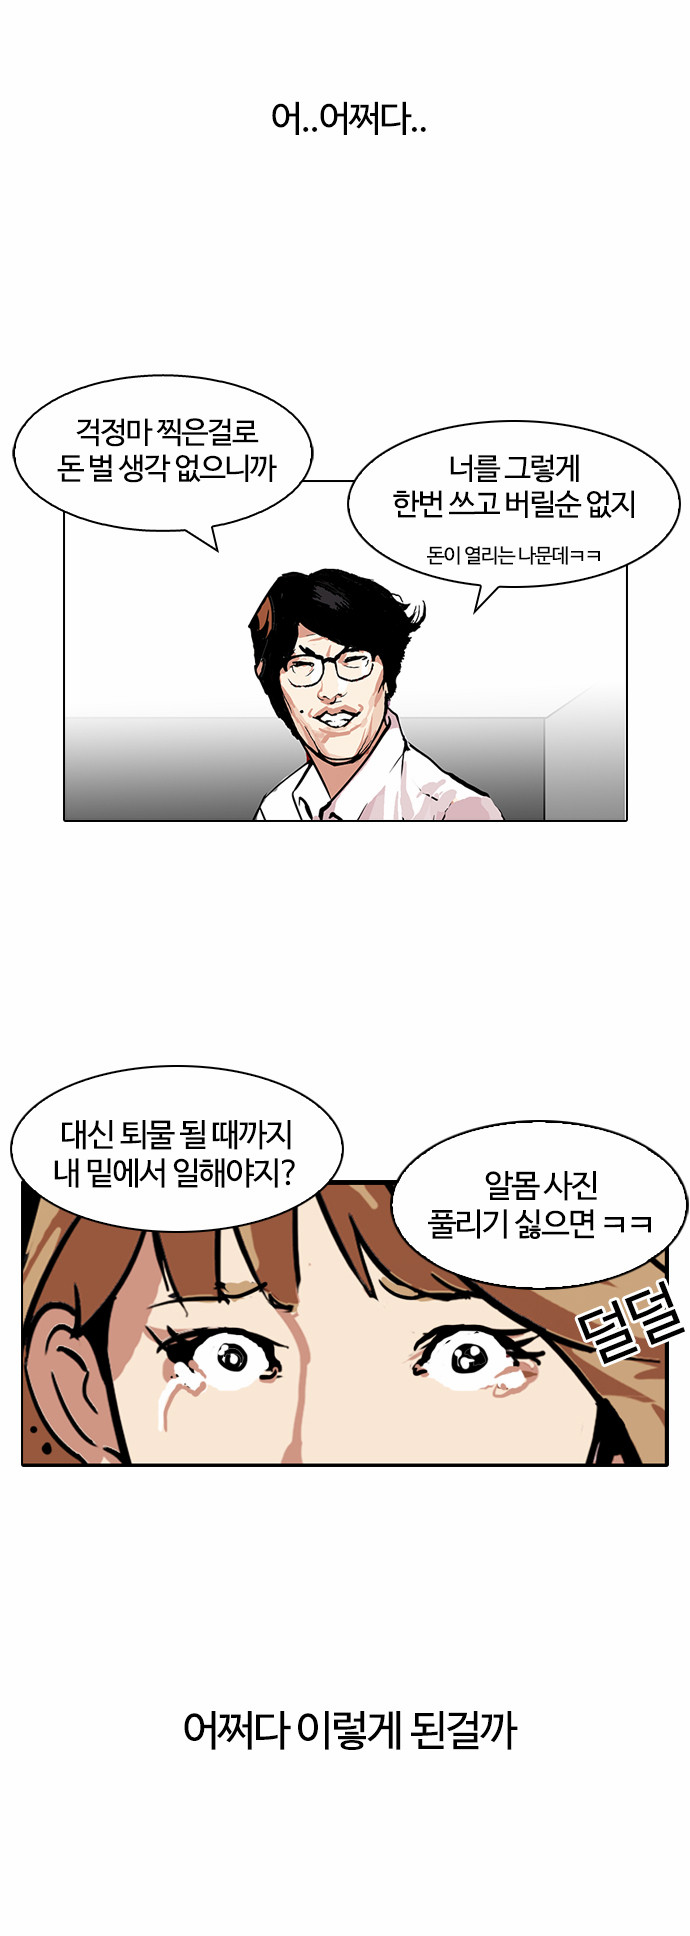 Lookism - Chapter 107 - Page 2